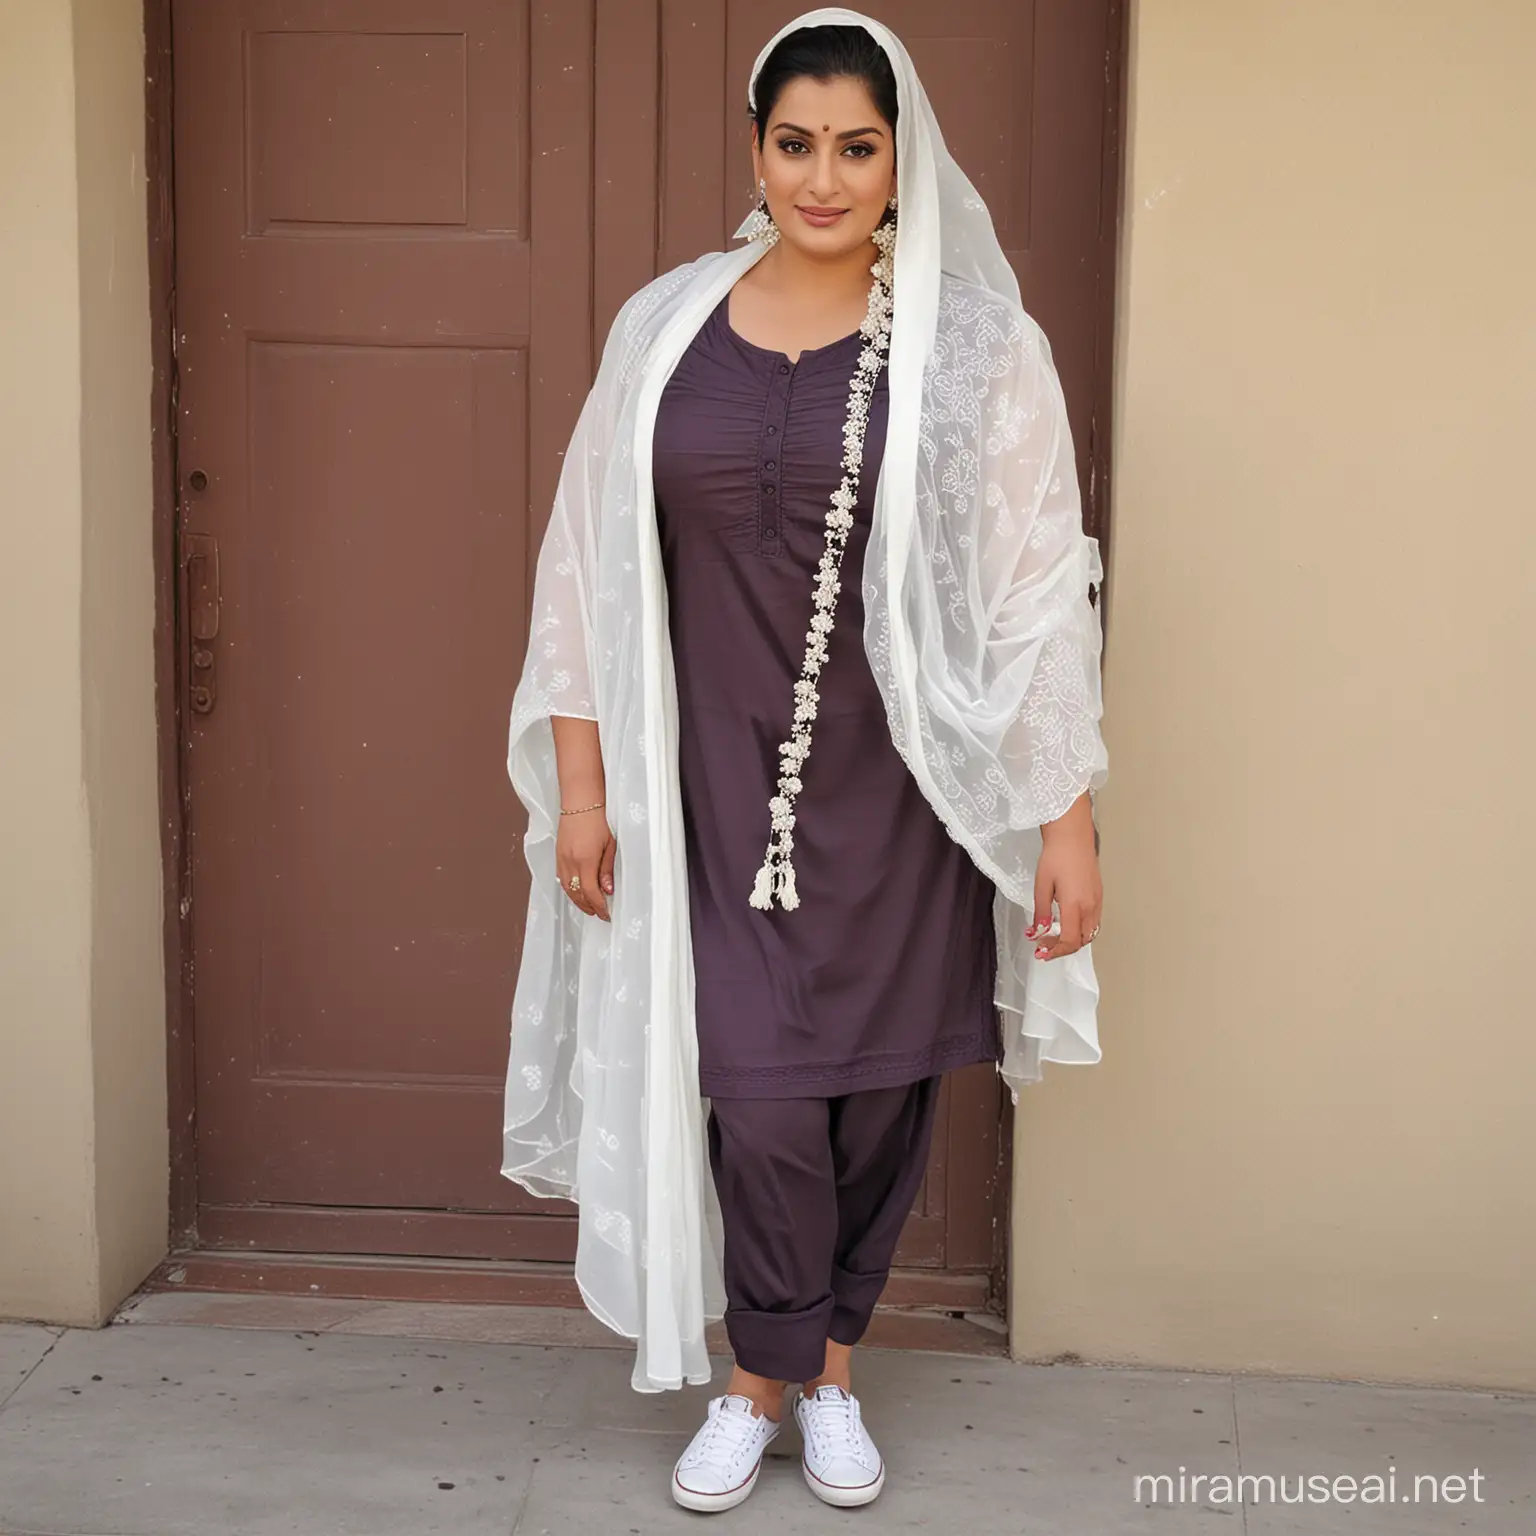 A busty Punjabi anuty wearing full perfect Shalwar Kameez wait white shawl and a pair of white converse ballerina 